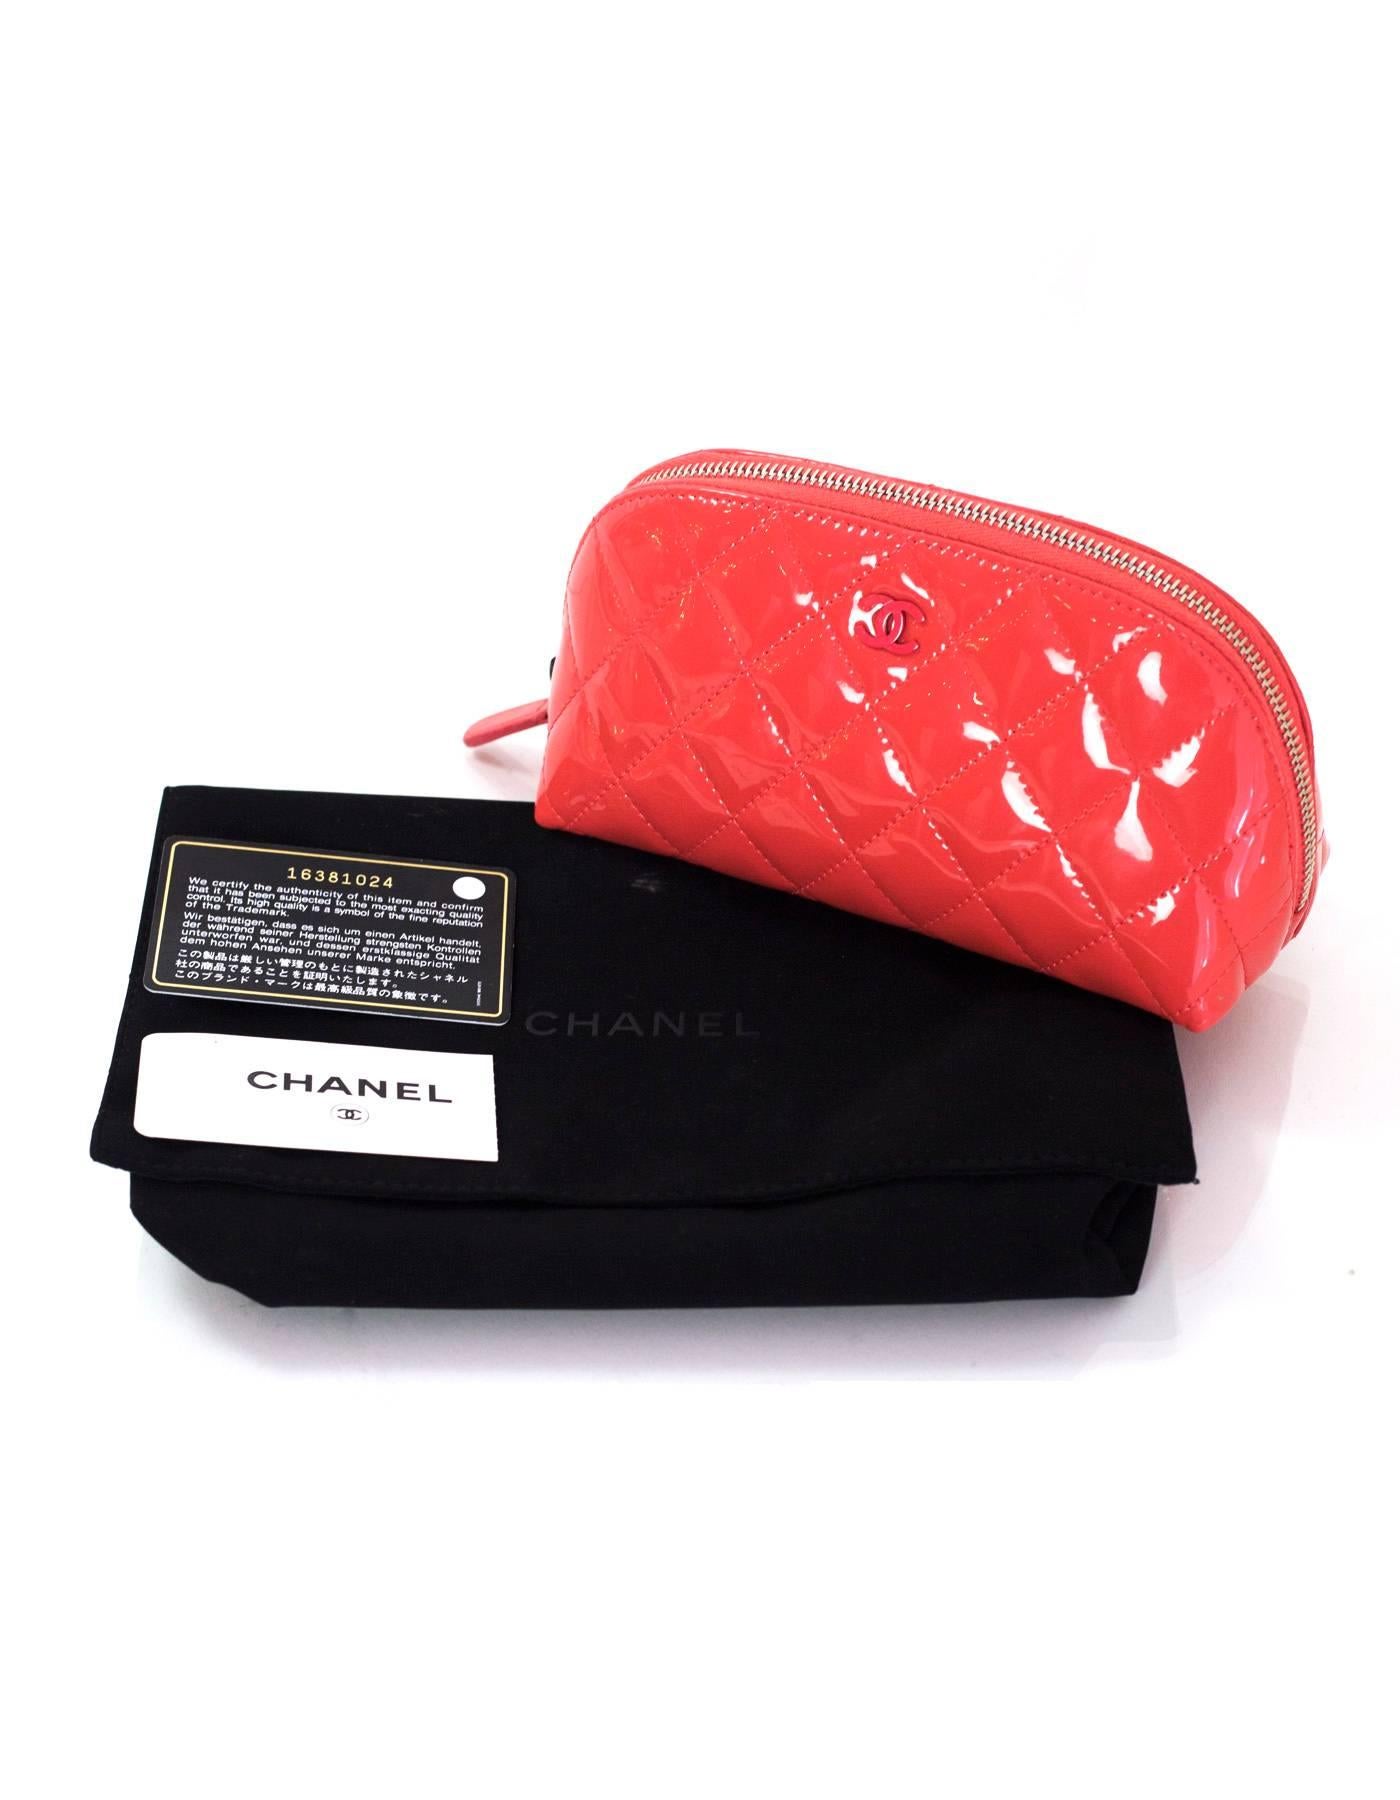 Chanel Coral Pink Patent Leather Quilted Cosmetic Case/Makeup Bag 3